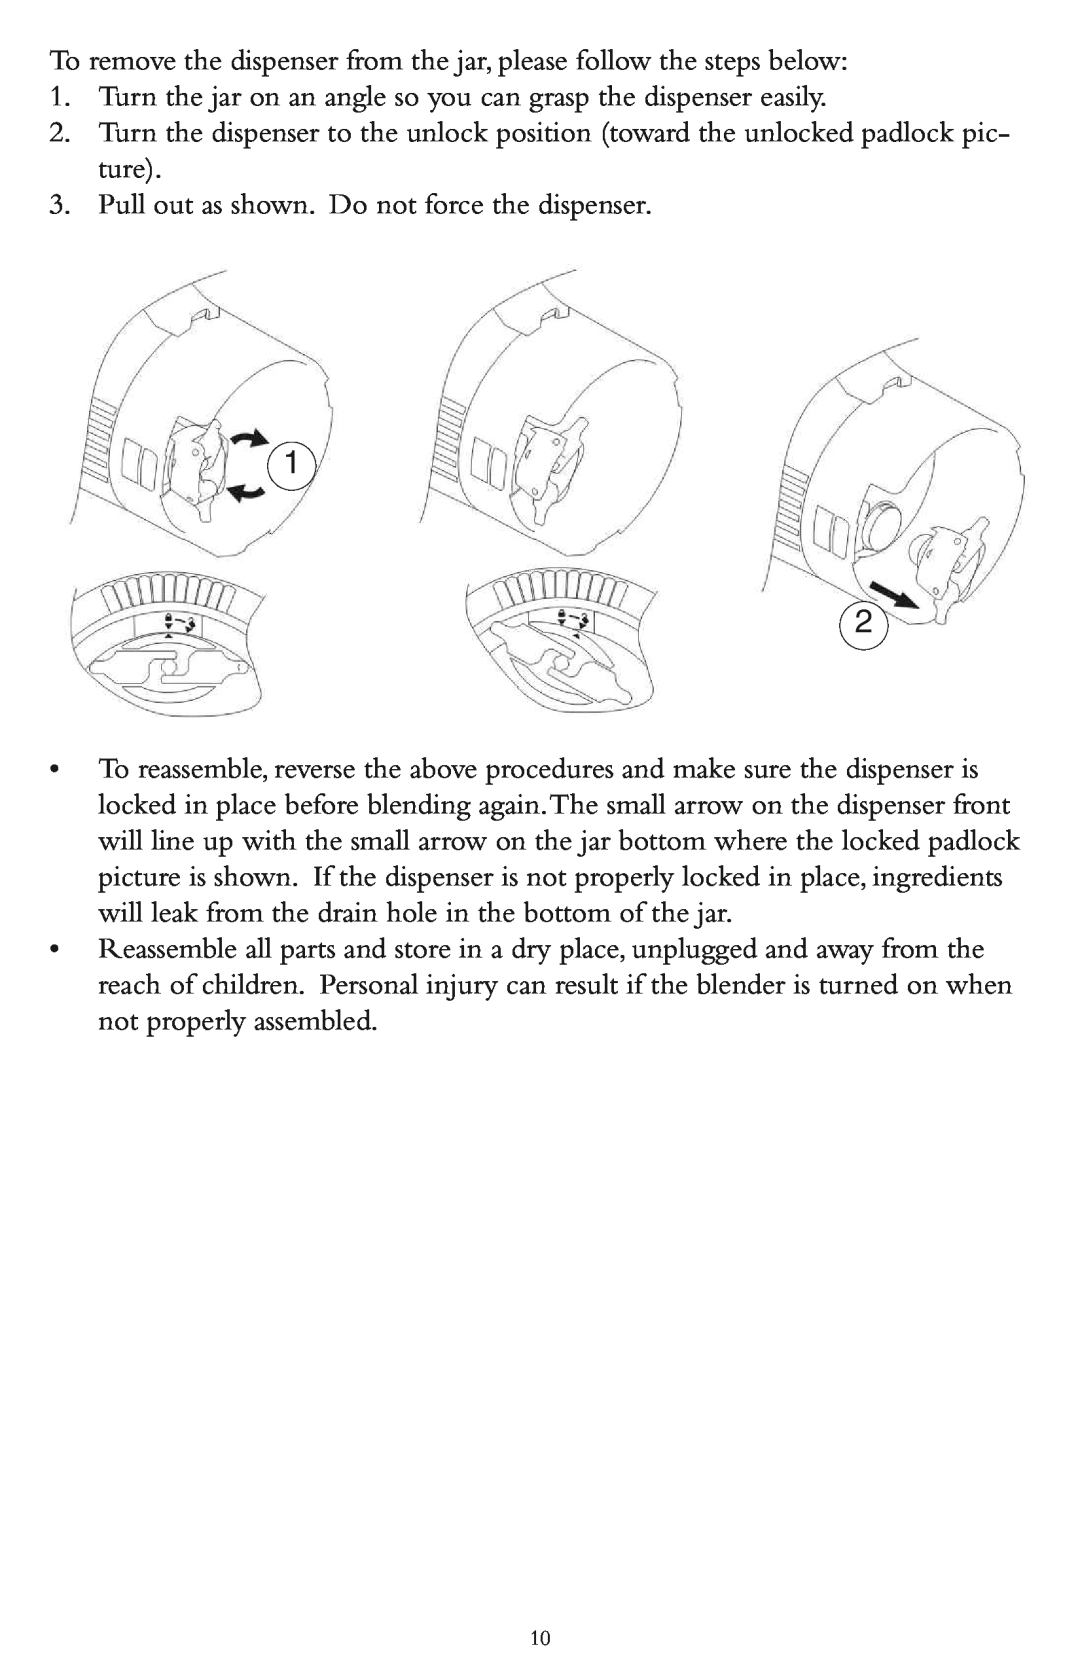 Taylor AB-1000-BL instruction manual Toremove the dispenser from the jar, please follow the steps below 